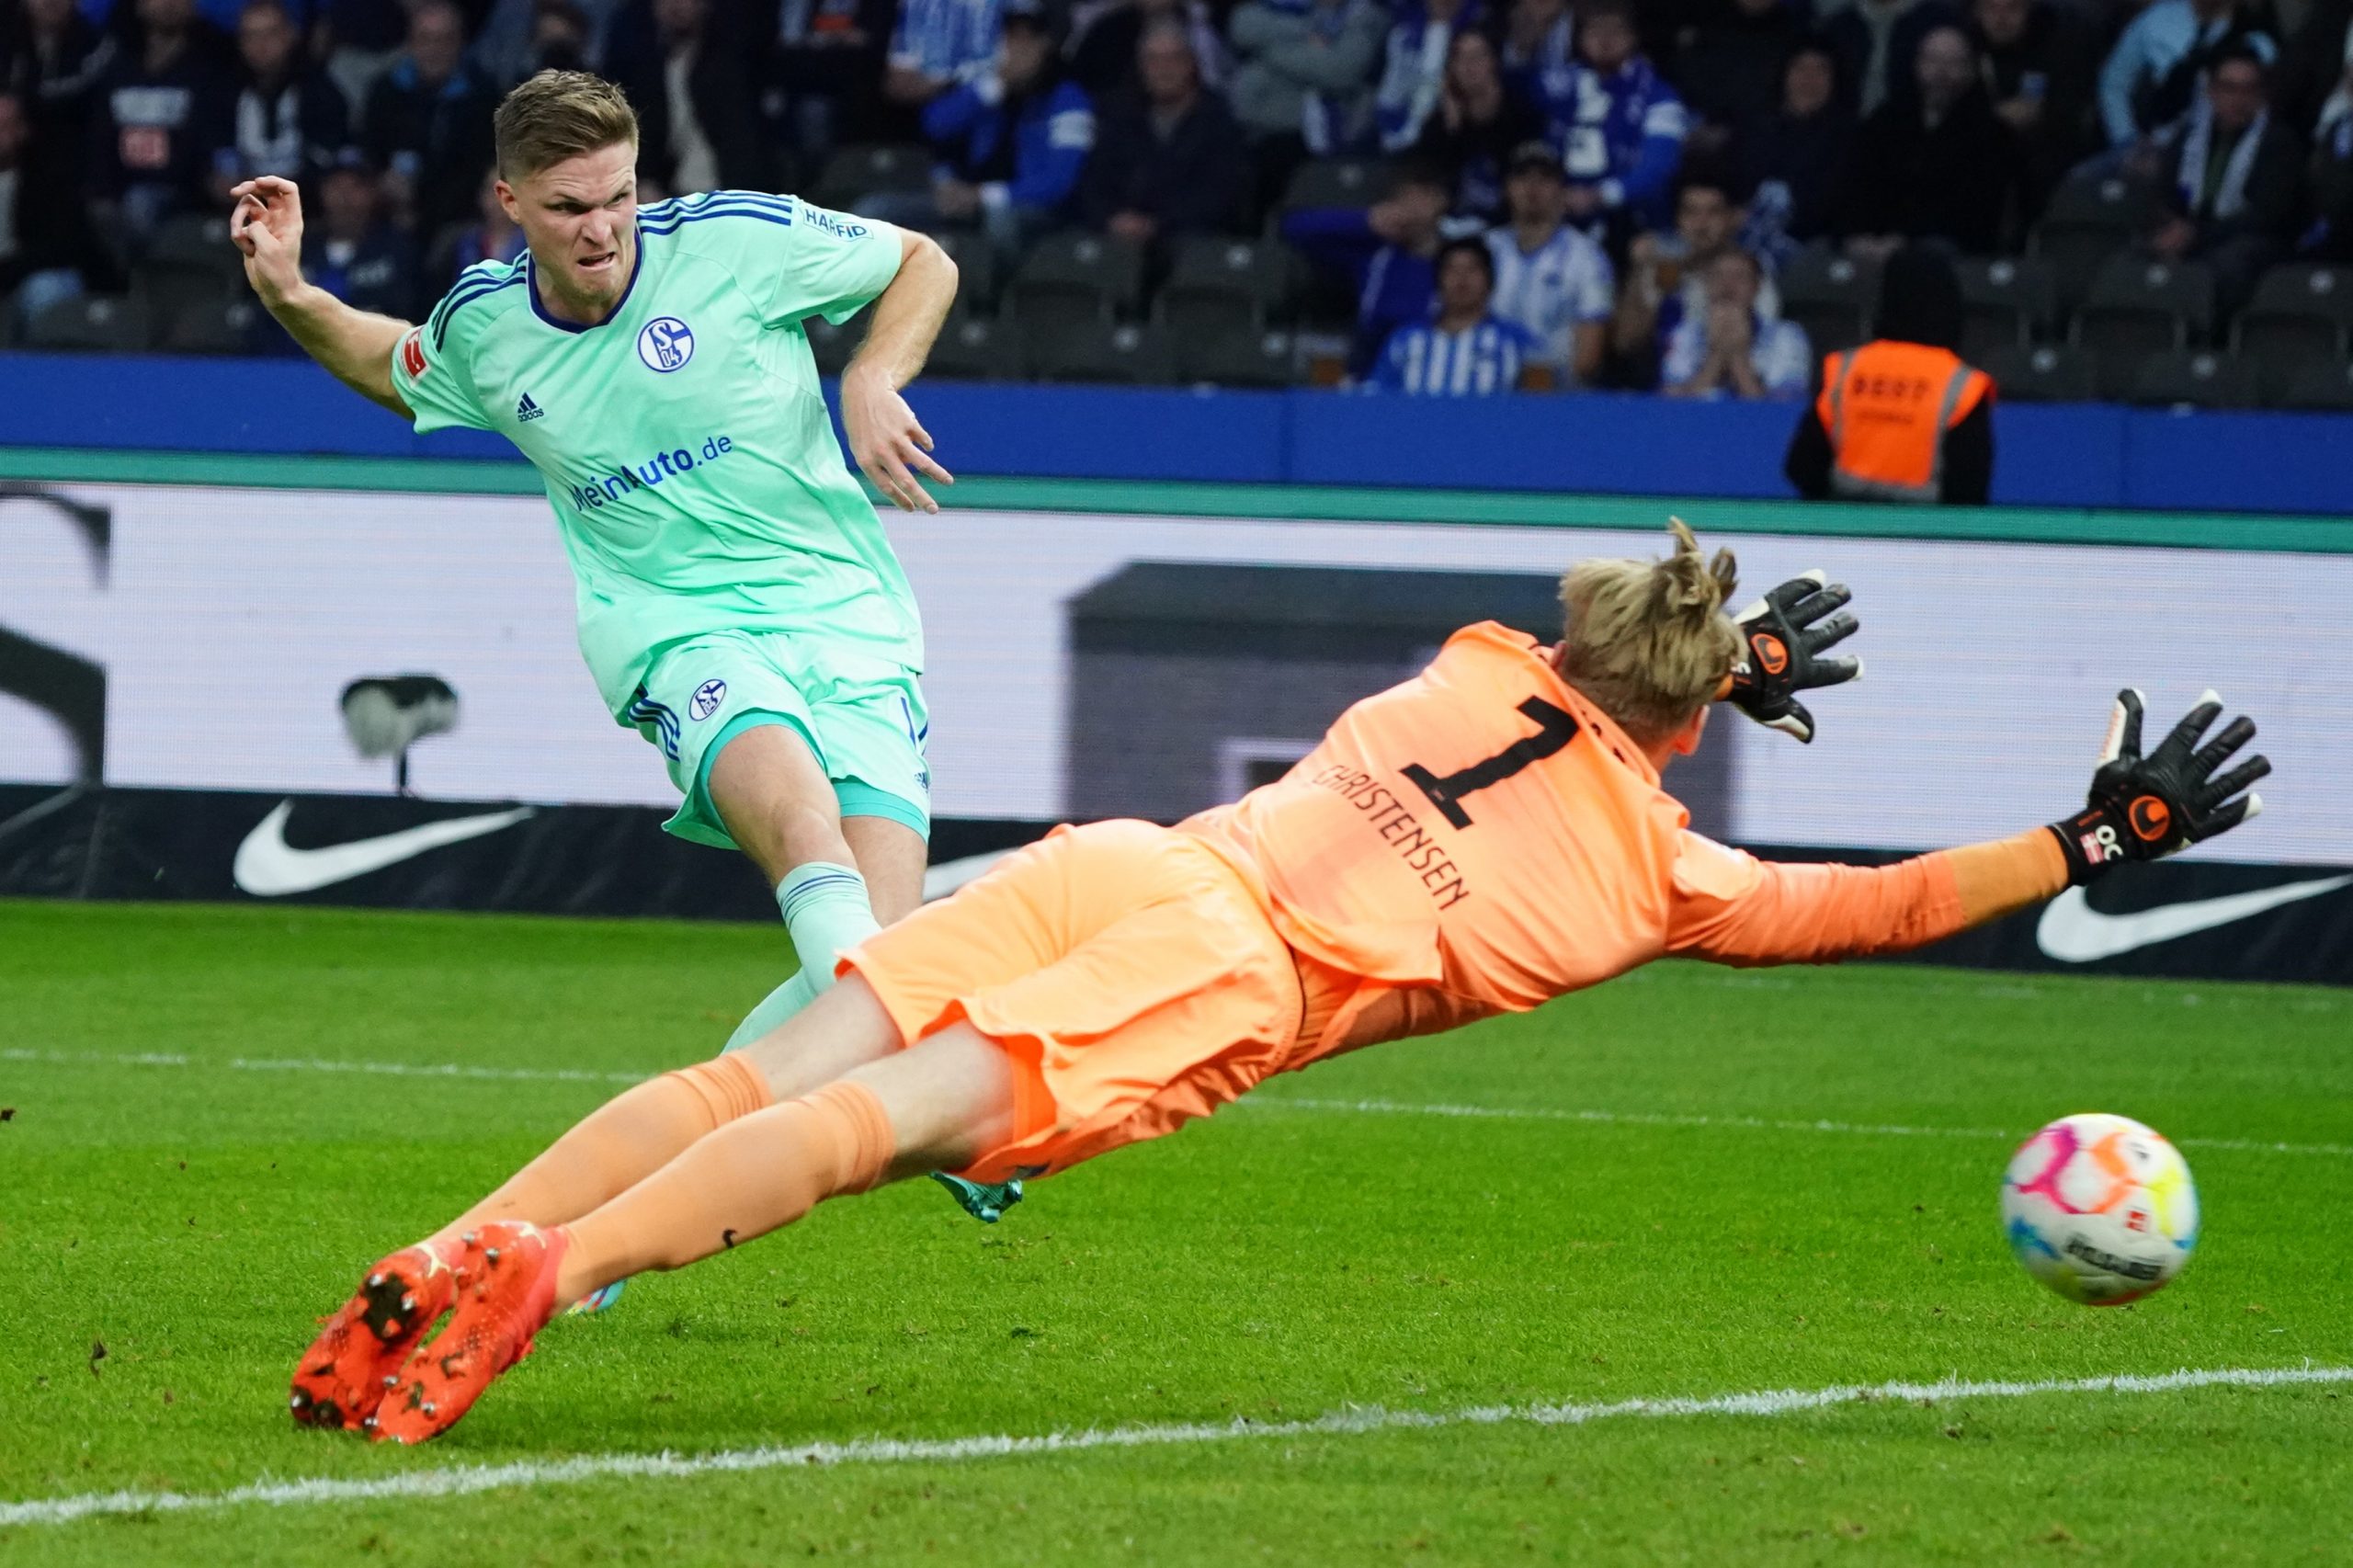 epa10261134 Schalke’s Marius Buelter (L) in action against Hertha’s goalkeeper Oliver Christensen during the German Bundesliga soccer match between Hertha BSC and FC Schalke 04 in Berlin, Germany, 23 October 2022.  EPA/CLEMENS BILAN (ATTENTION: The DFL regulations prohibit any use of photographs as image sequences and/or quasi-video.)